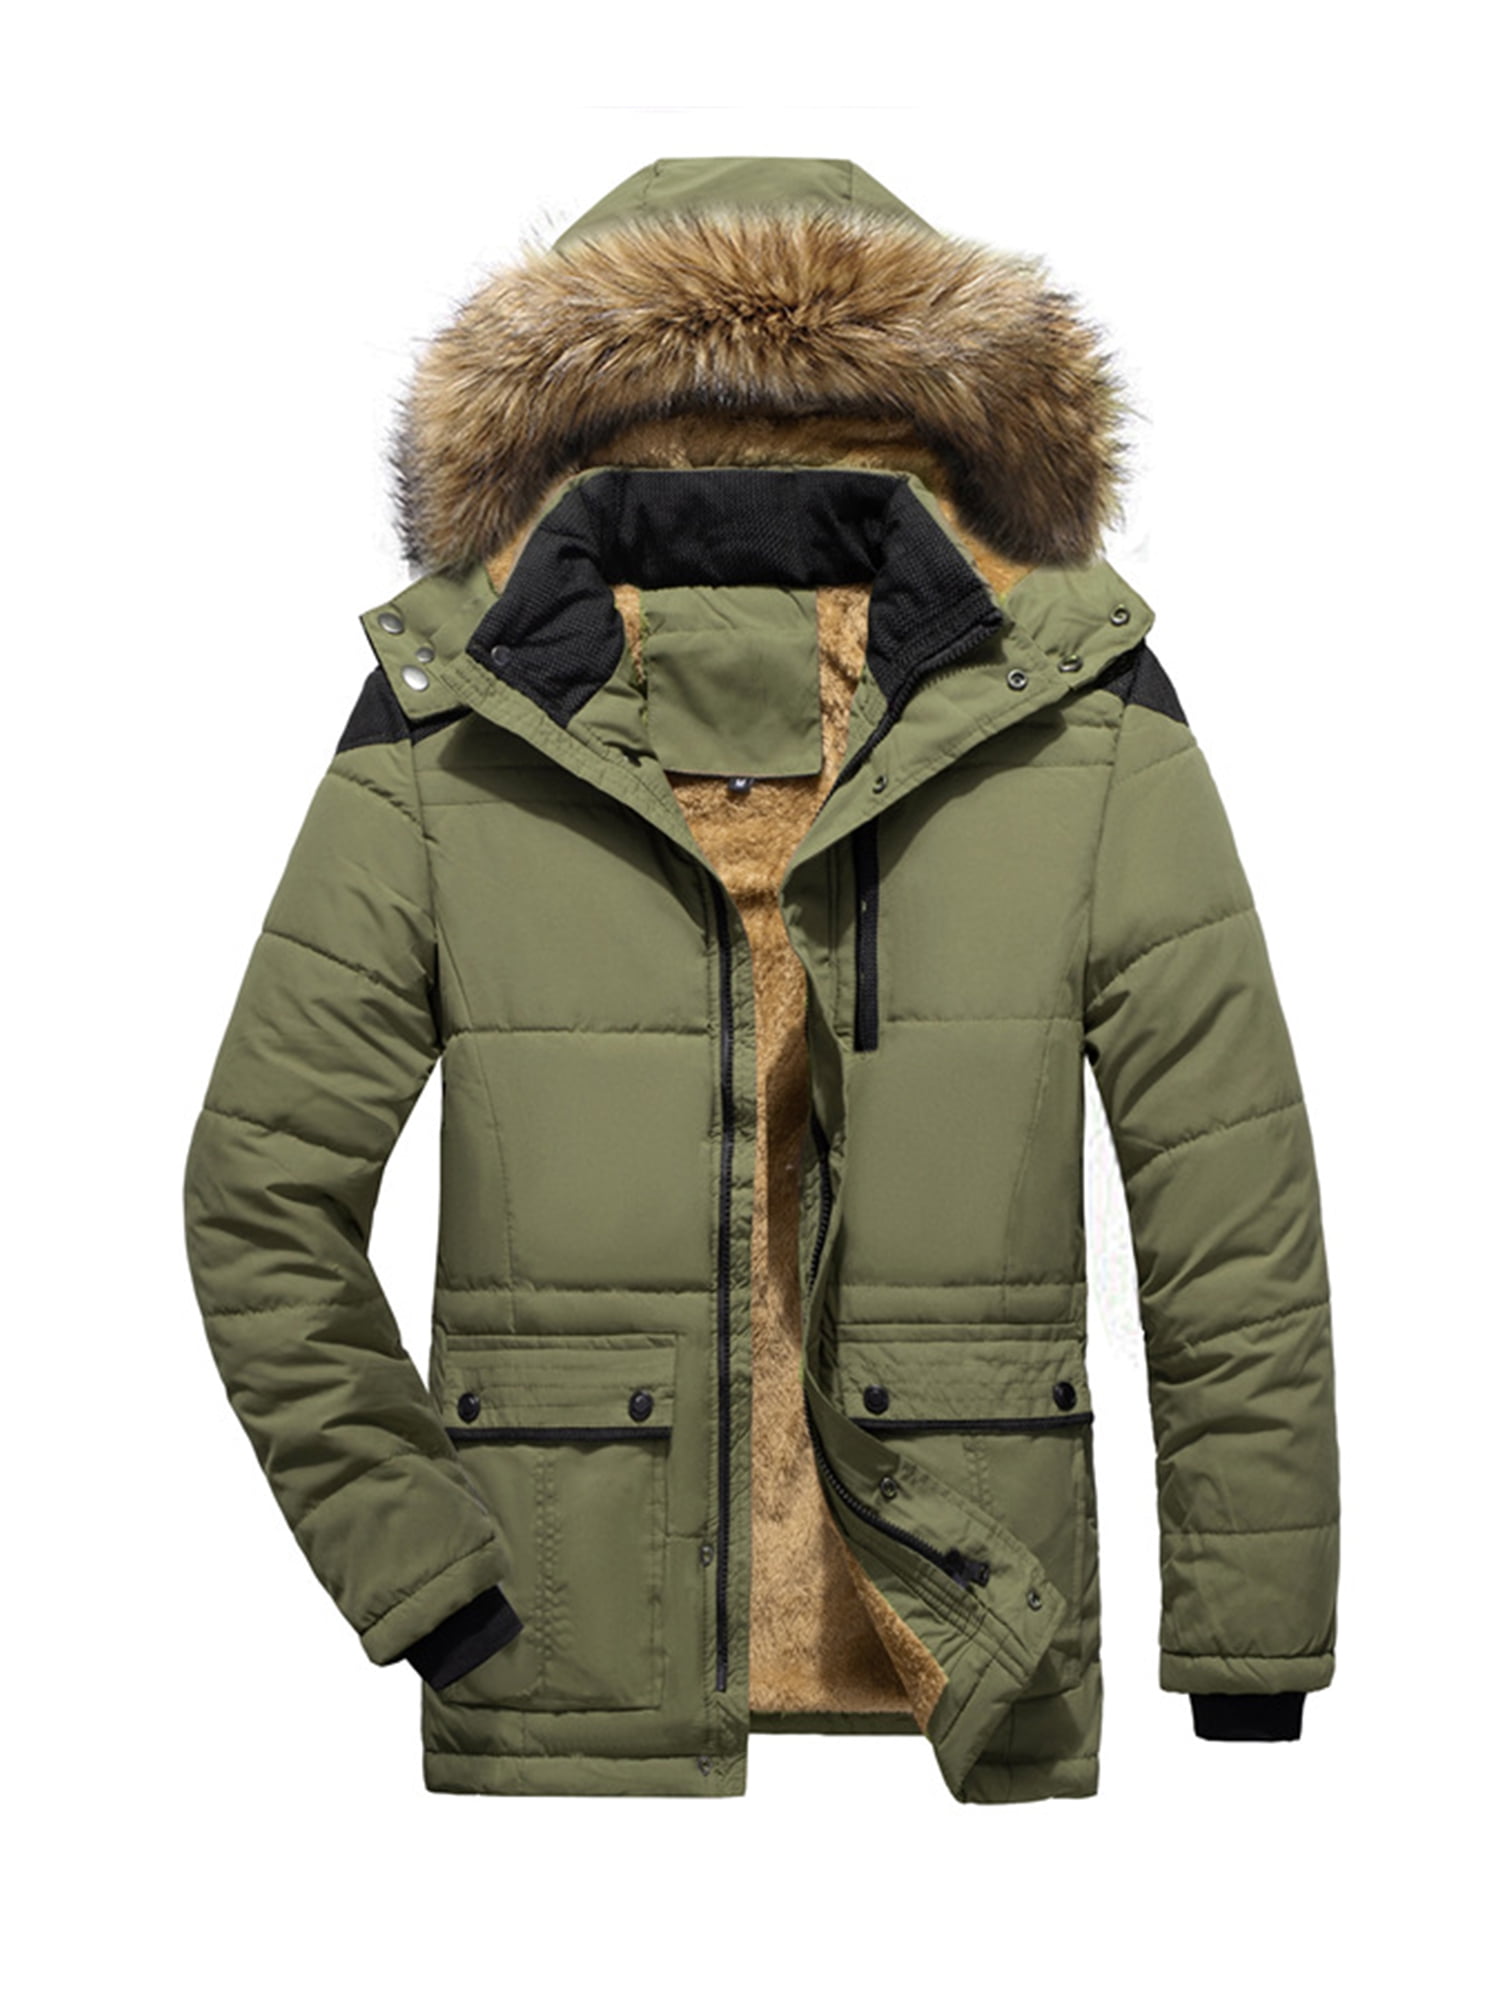 ZXFHZS Mens Winter Quilted Thick Fit Parka Watertight Hoodie Coats Coat Outwear